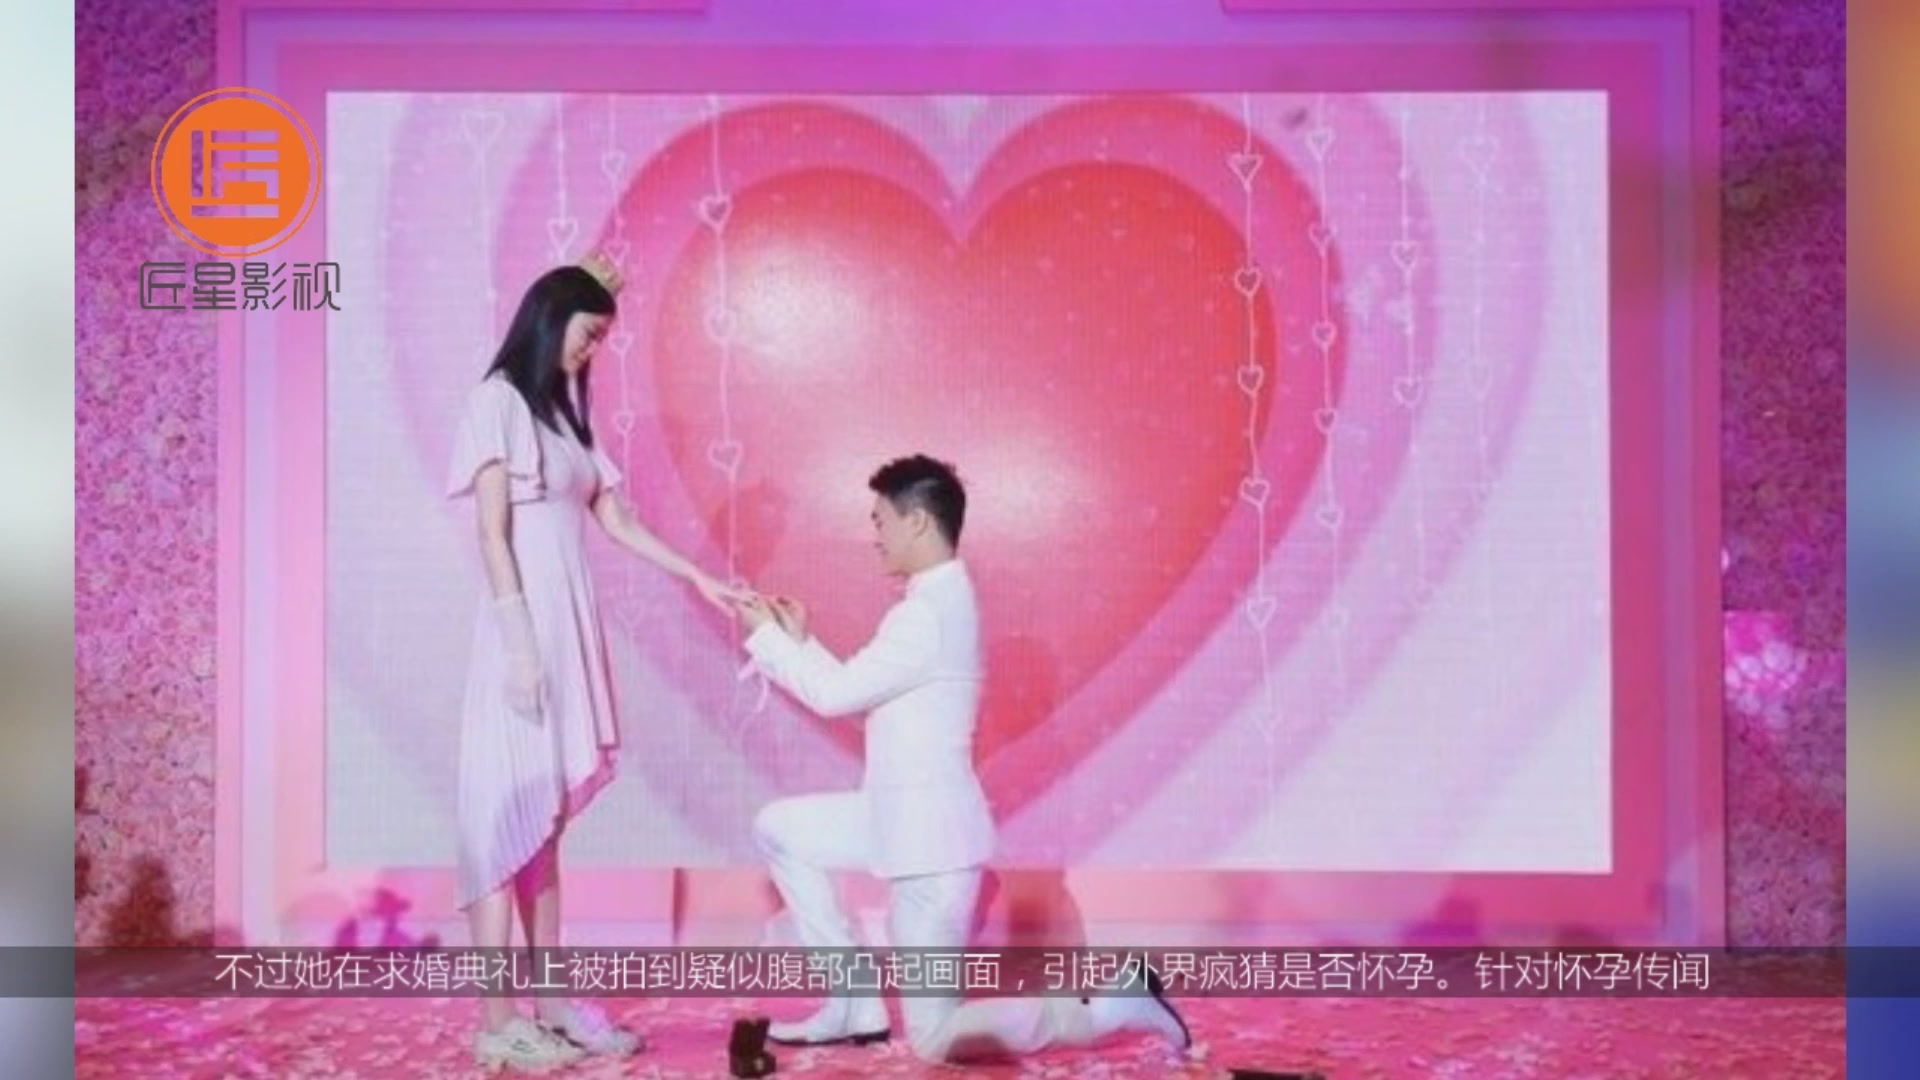 Xi Mengyao promised to propose because she was pregnant, as explained by Aunt Wang Siyi.